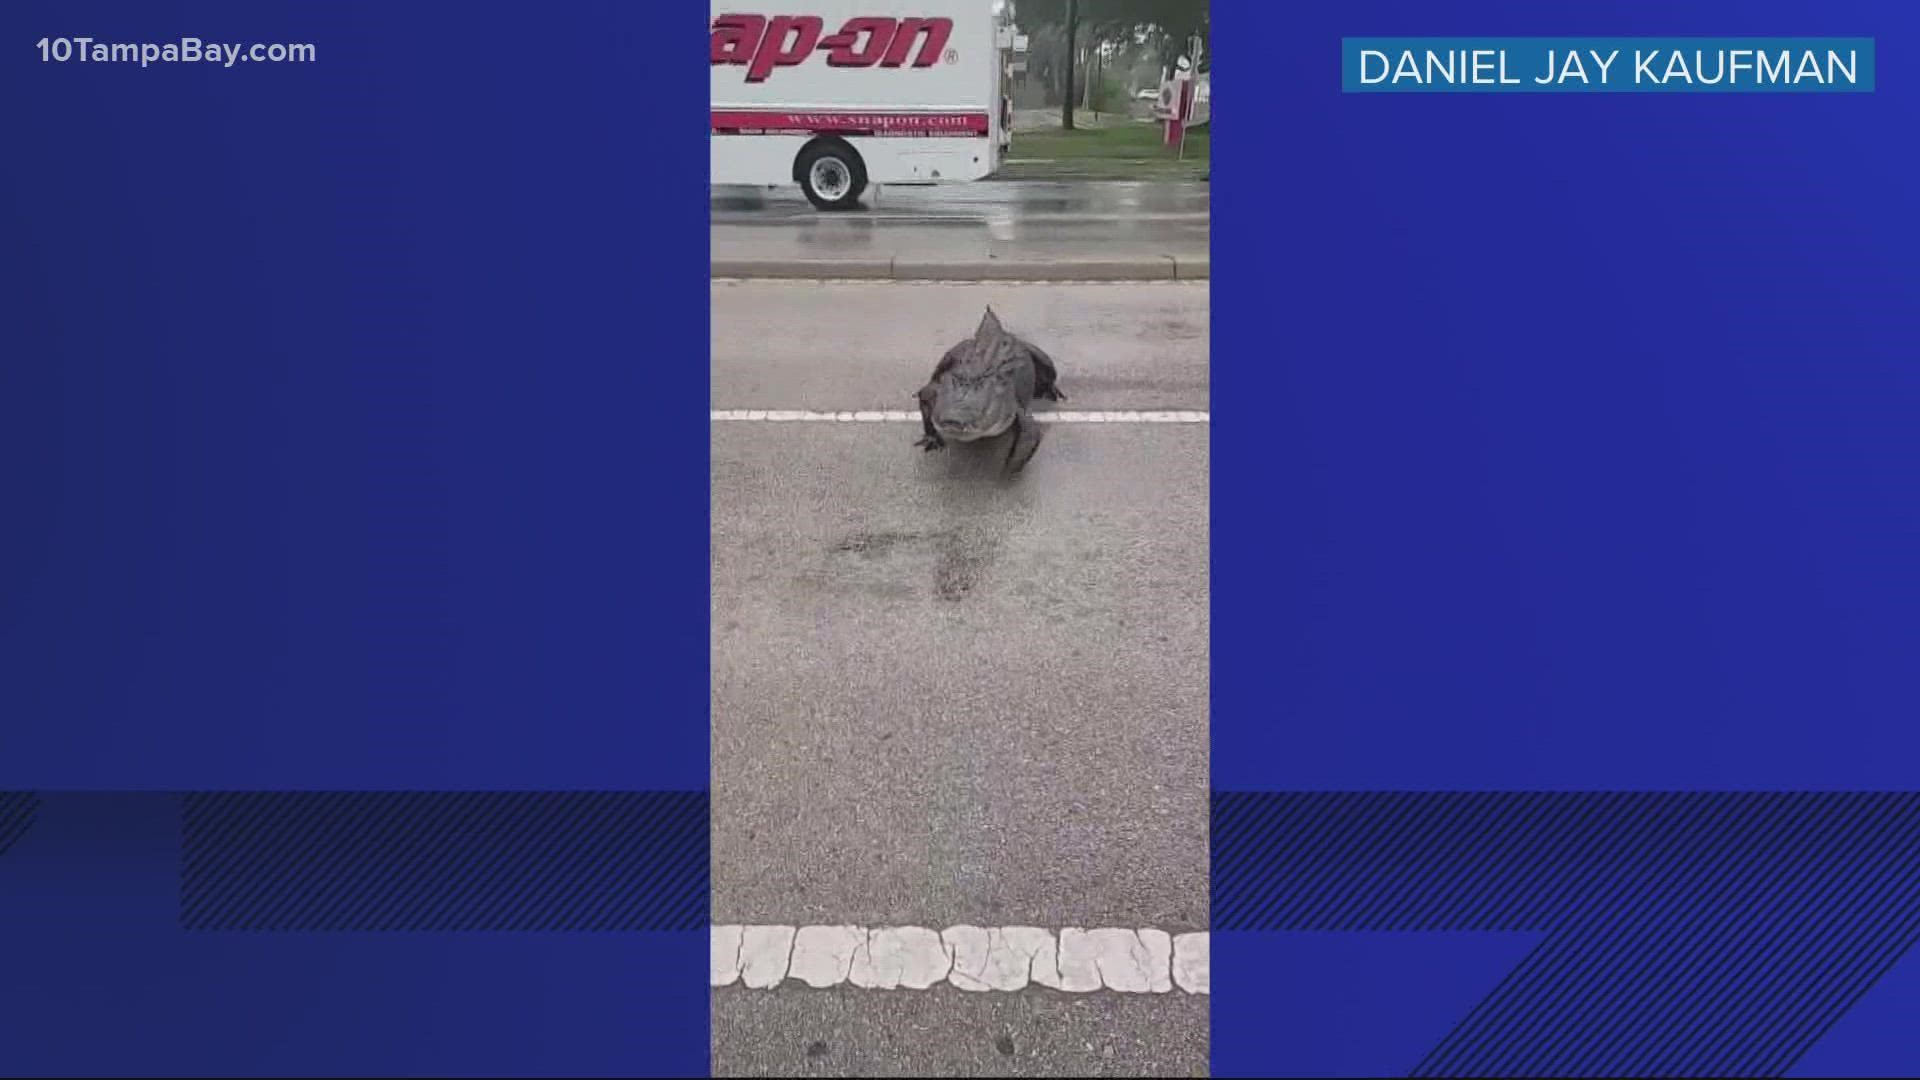 This gator had no problem stopping traffic while it made it's way across the street.